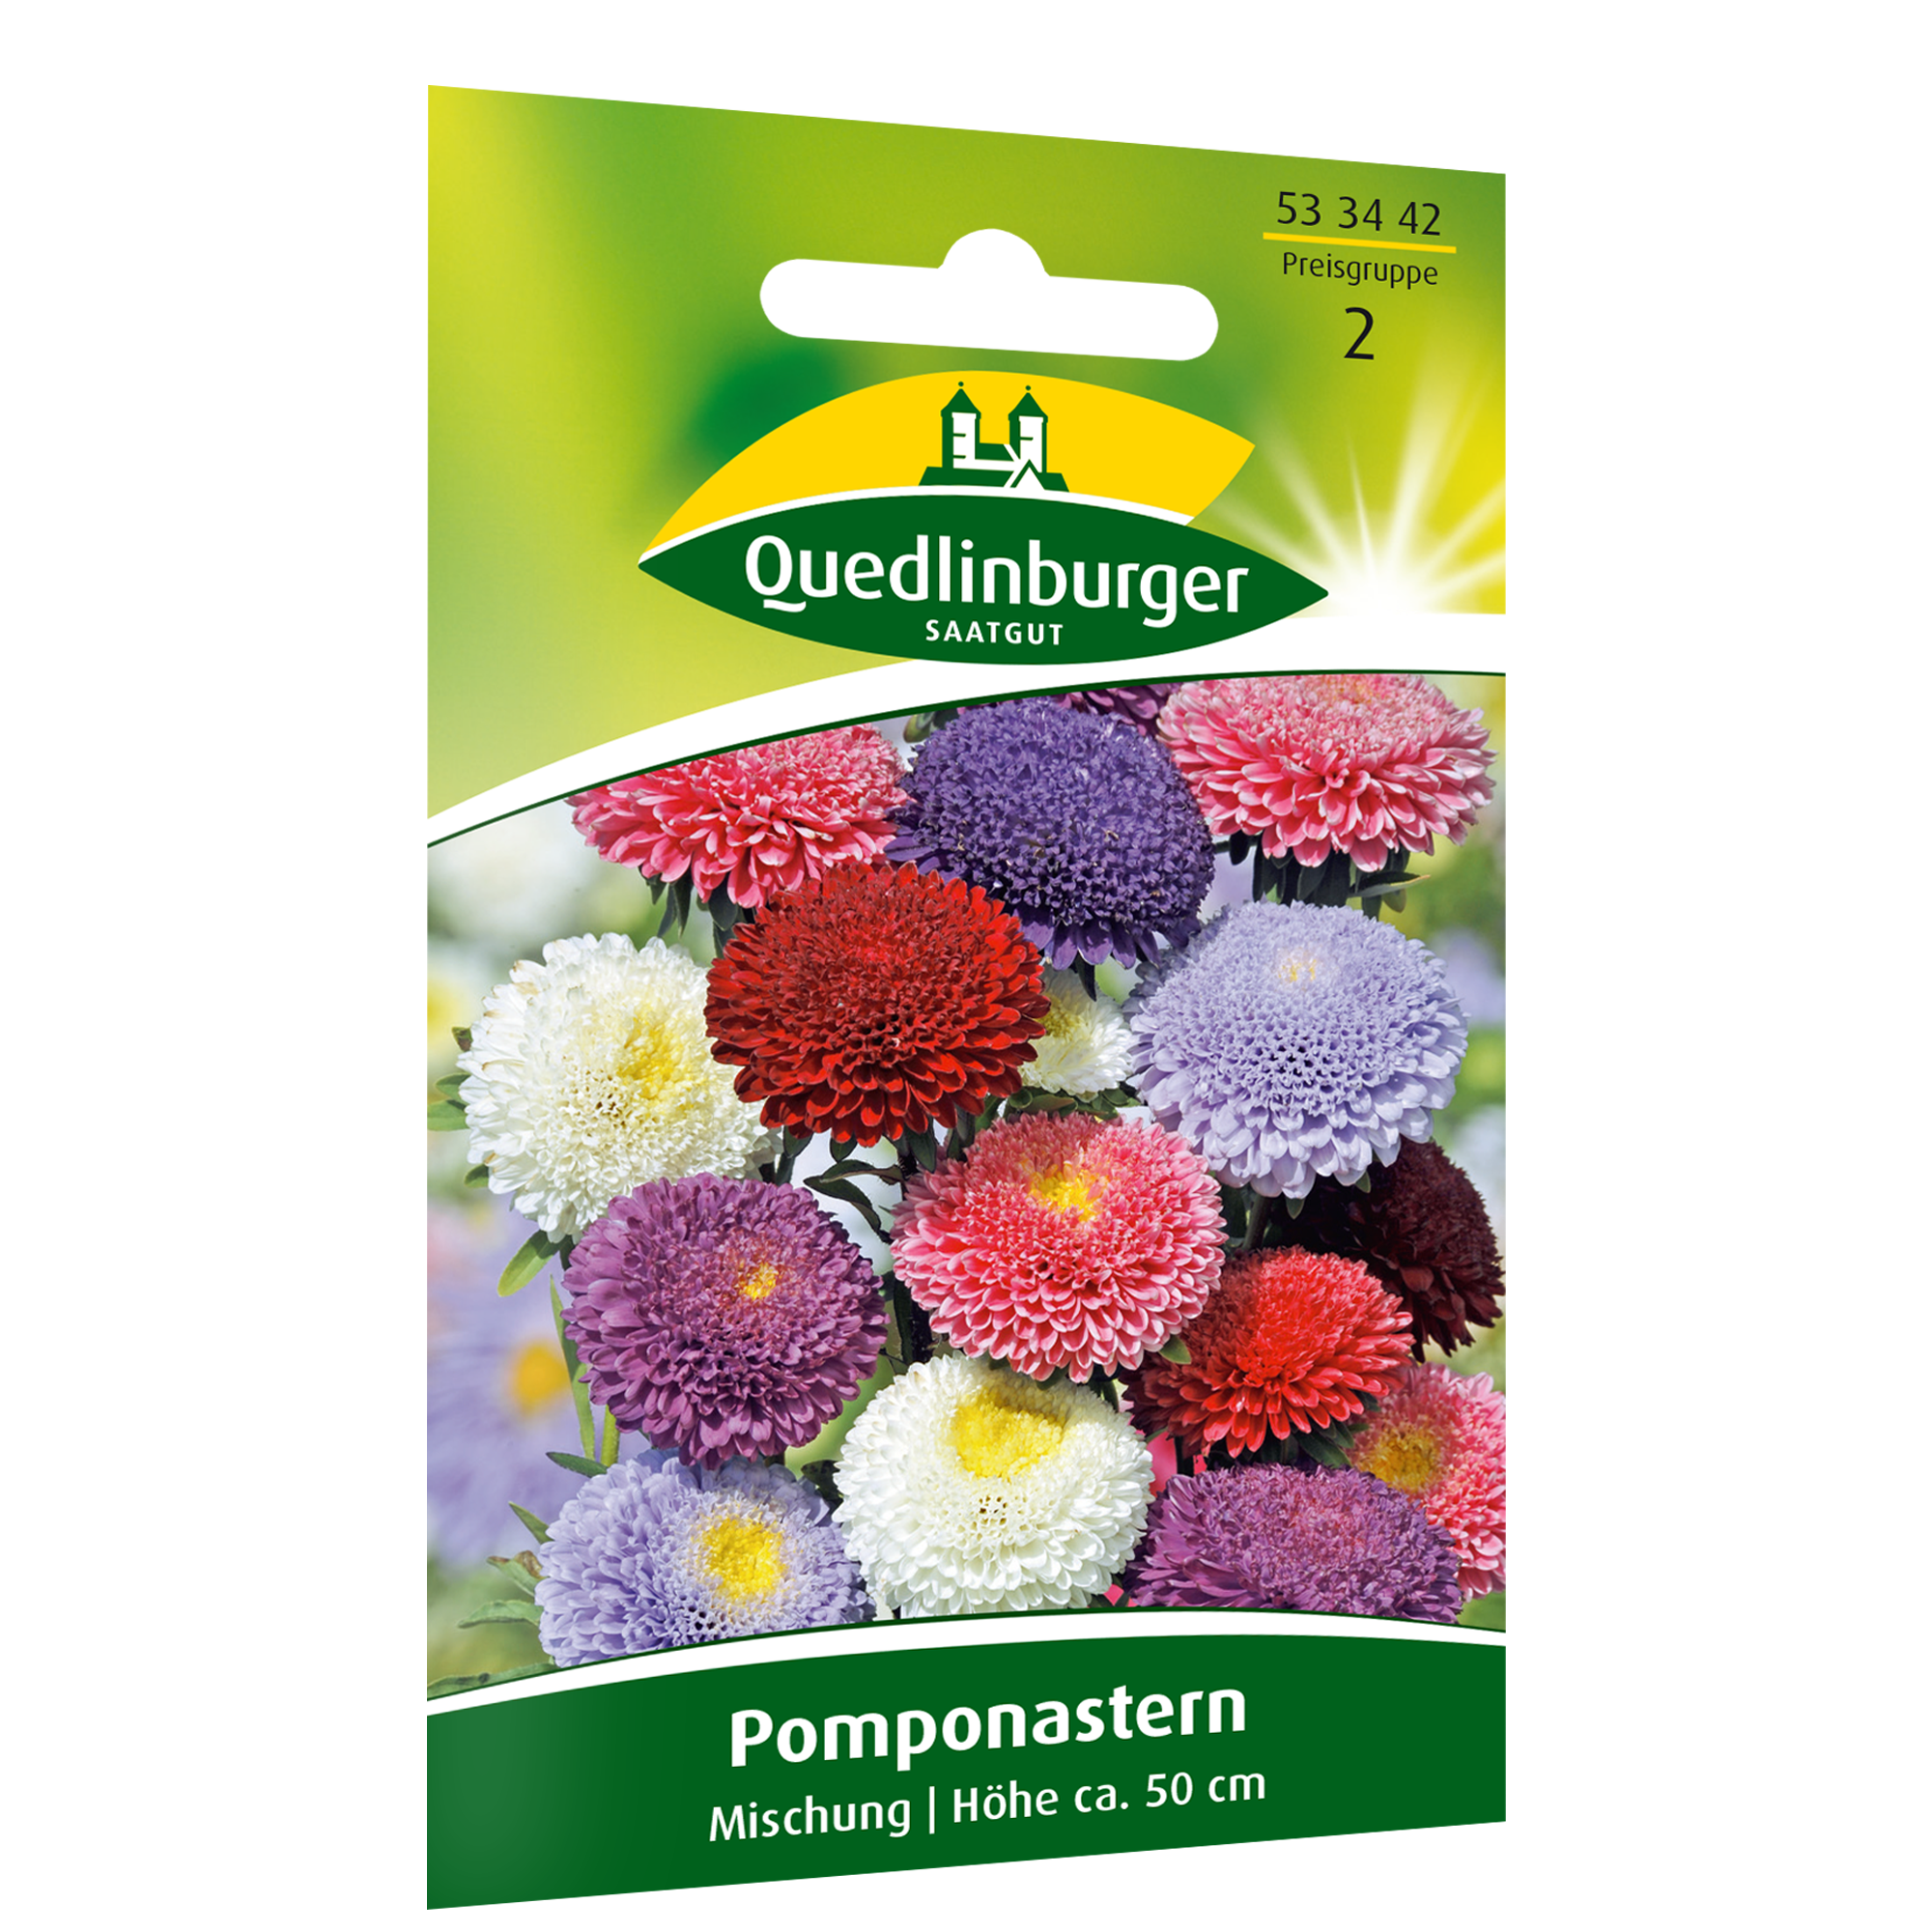 Pomponaster Mischung + product picture